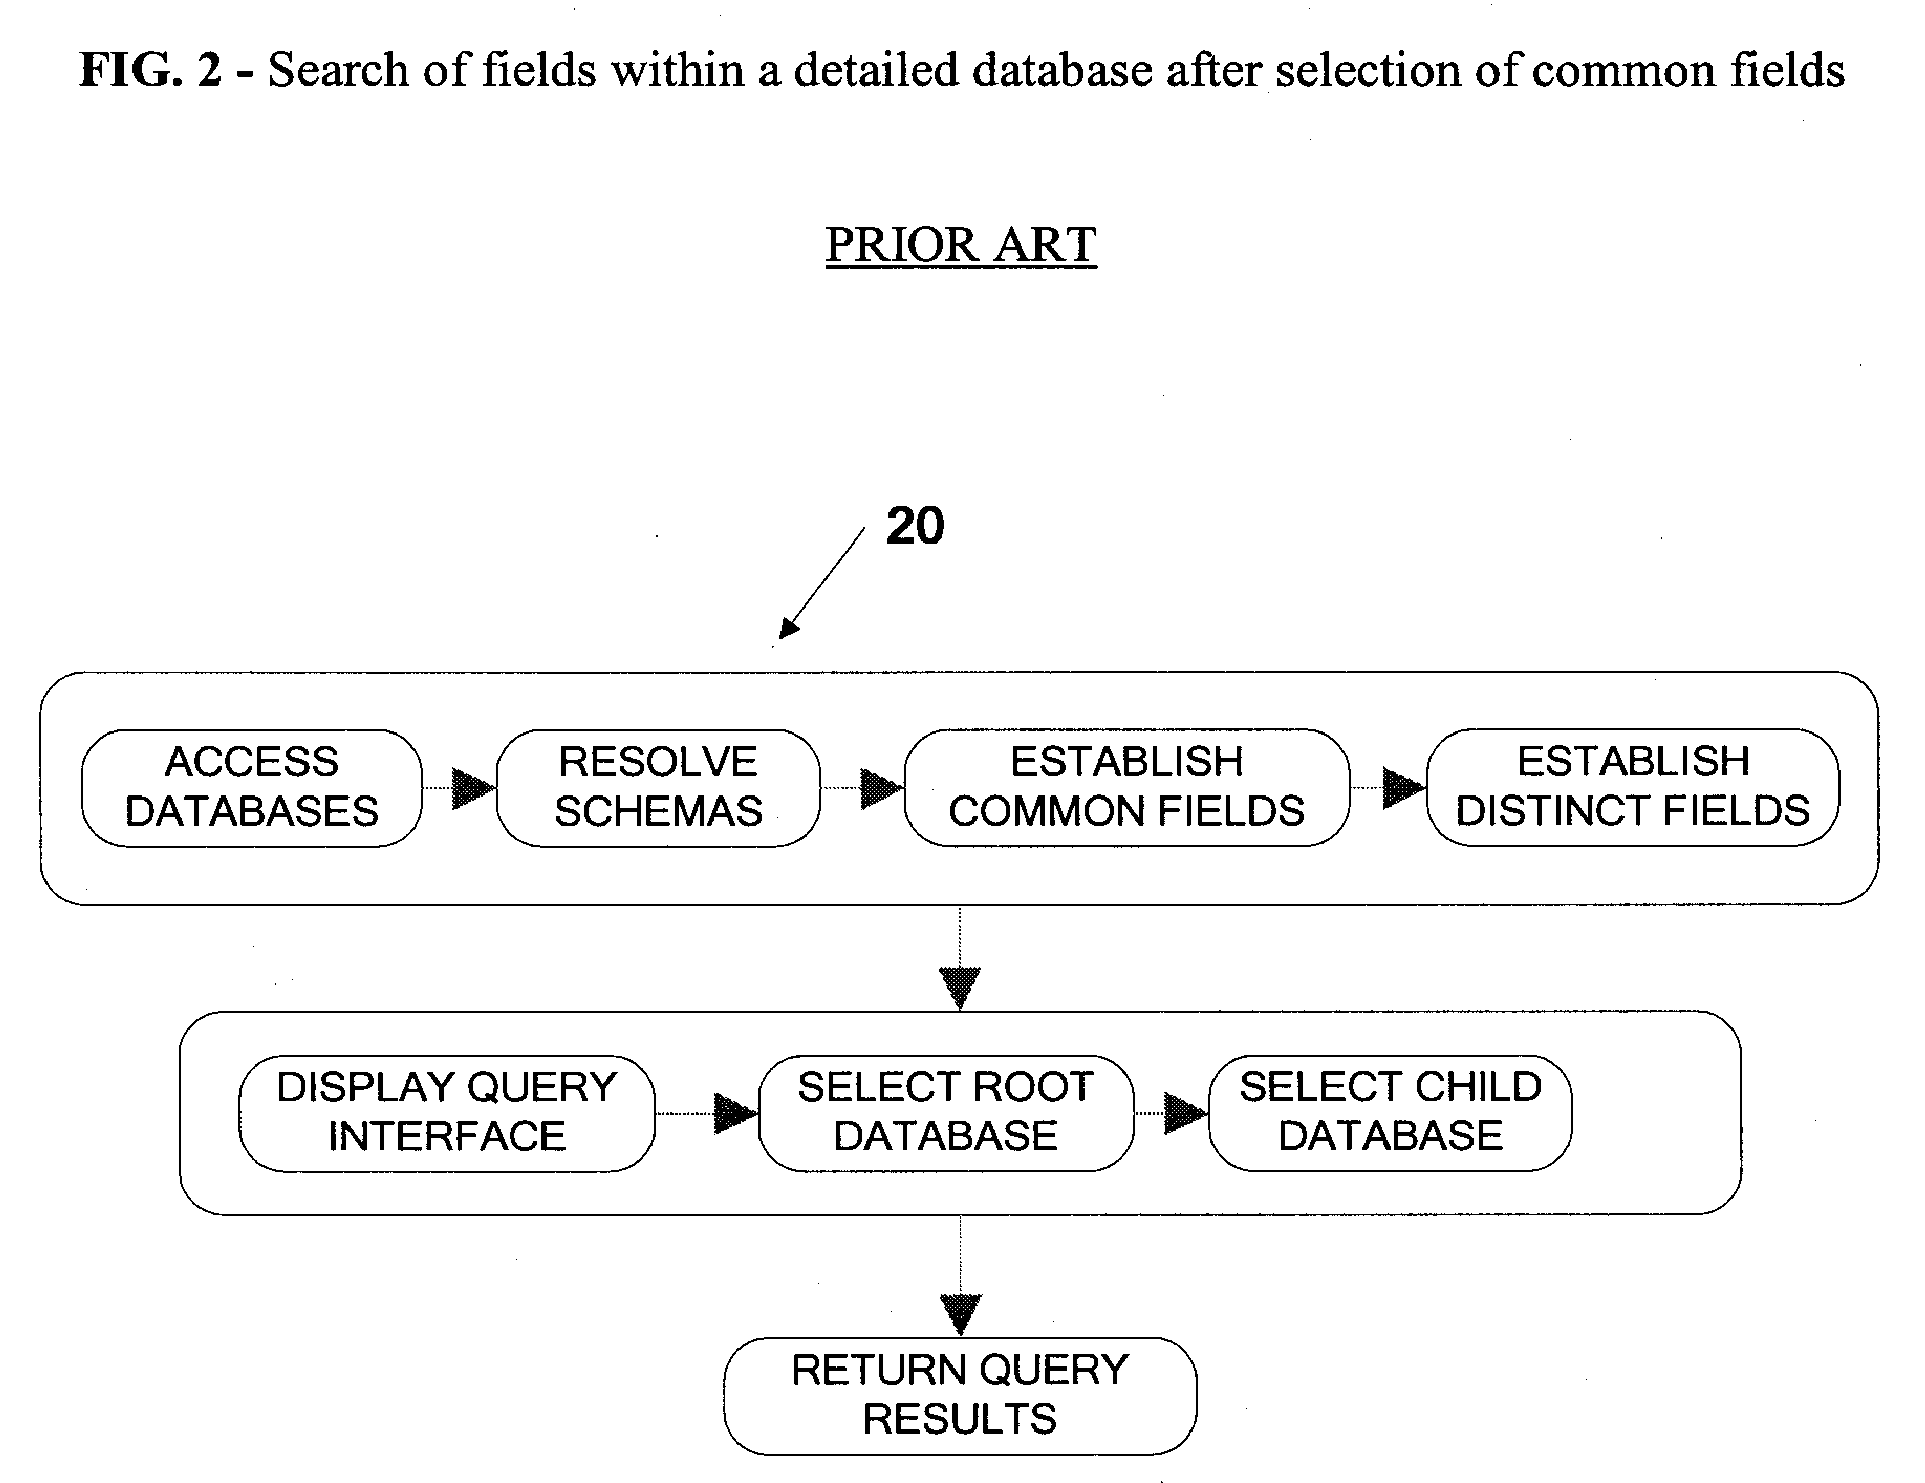 Methods and Systems for Developing a Data Repository for Heterogeneous MLS Systems